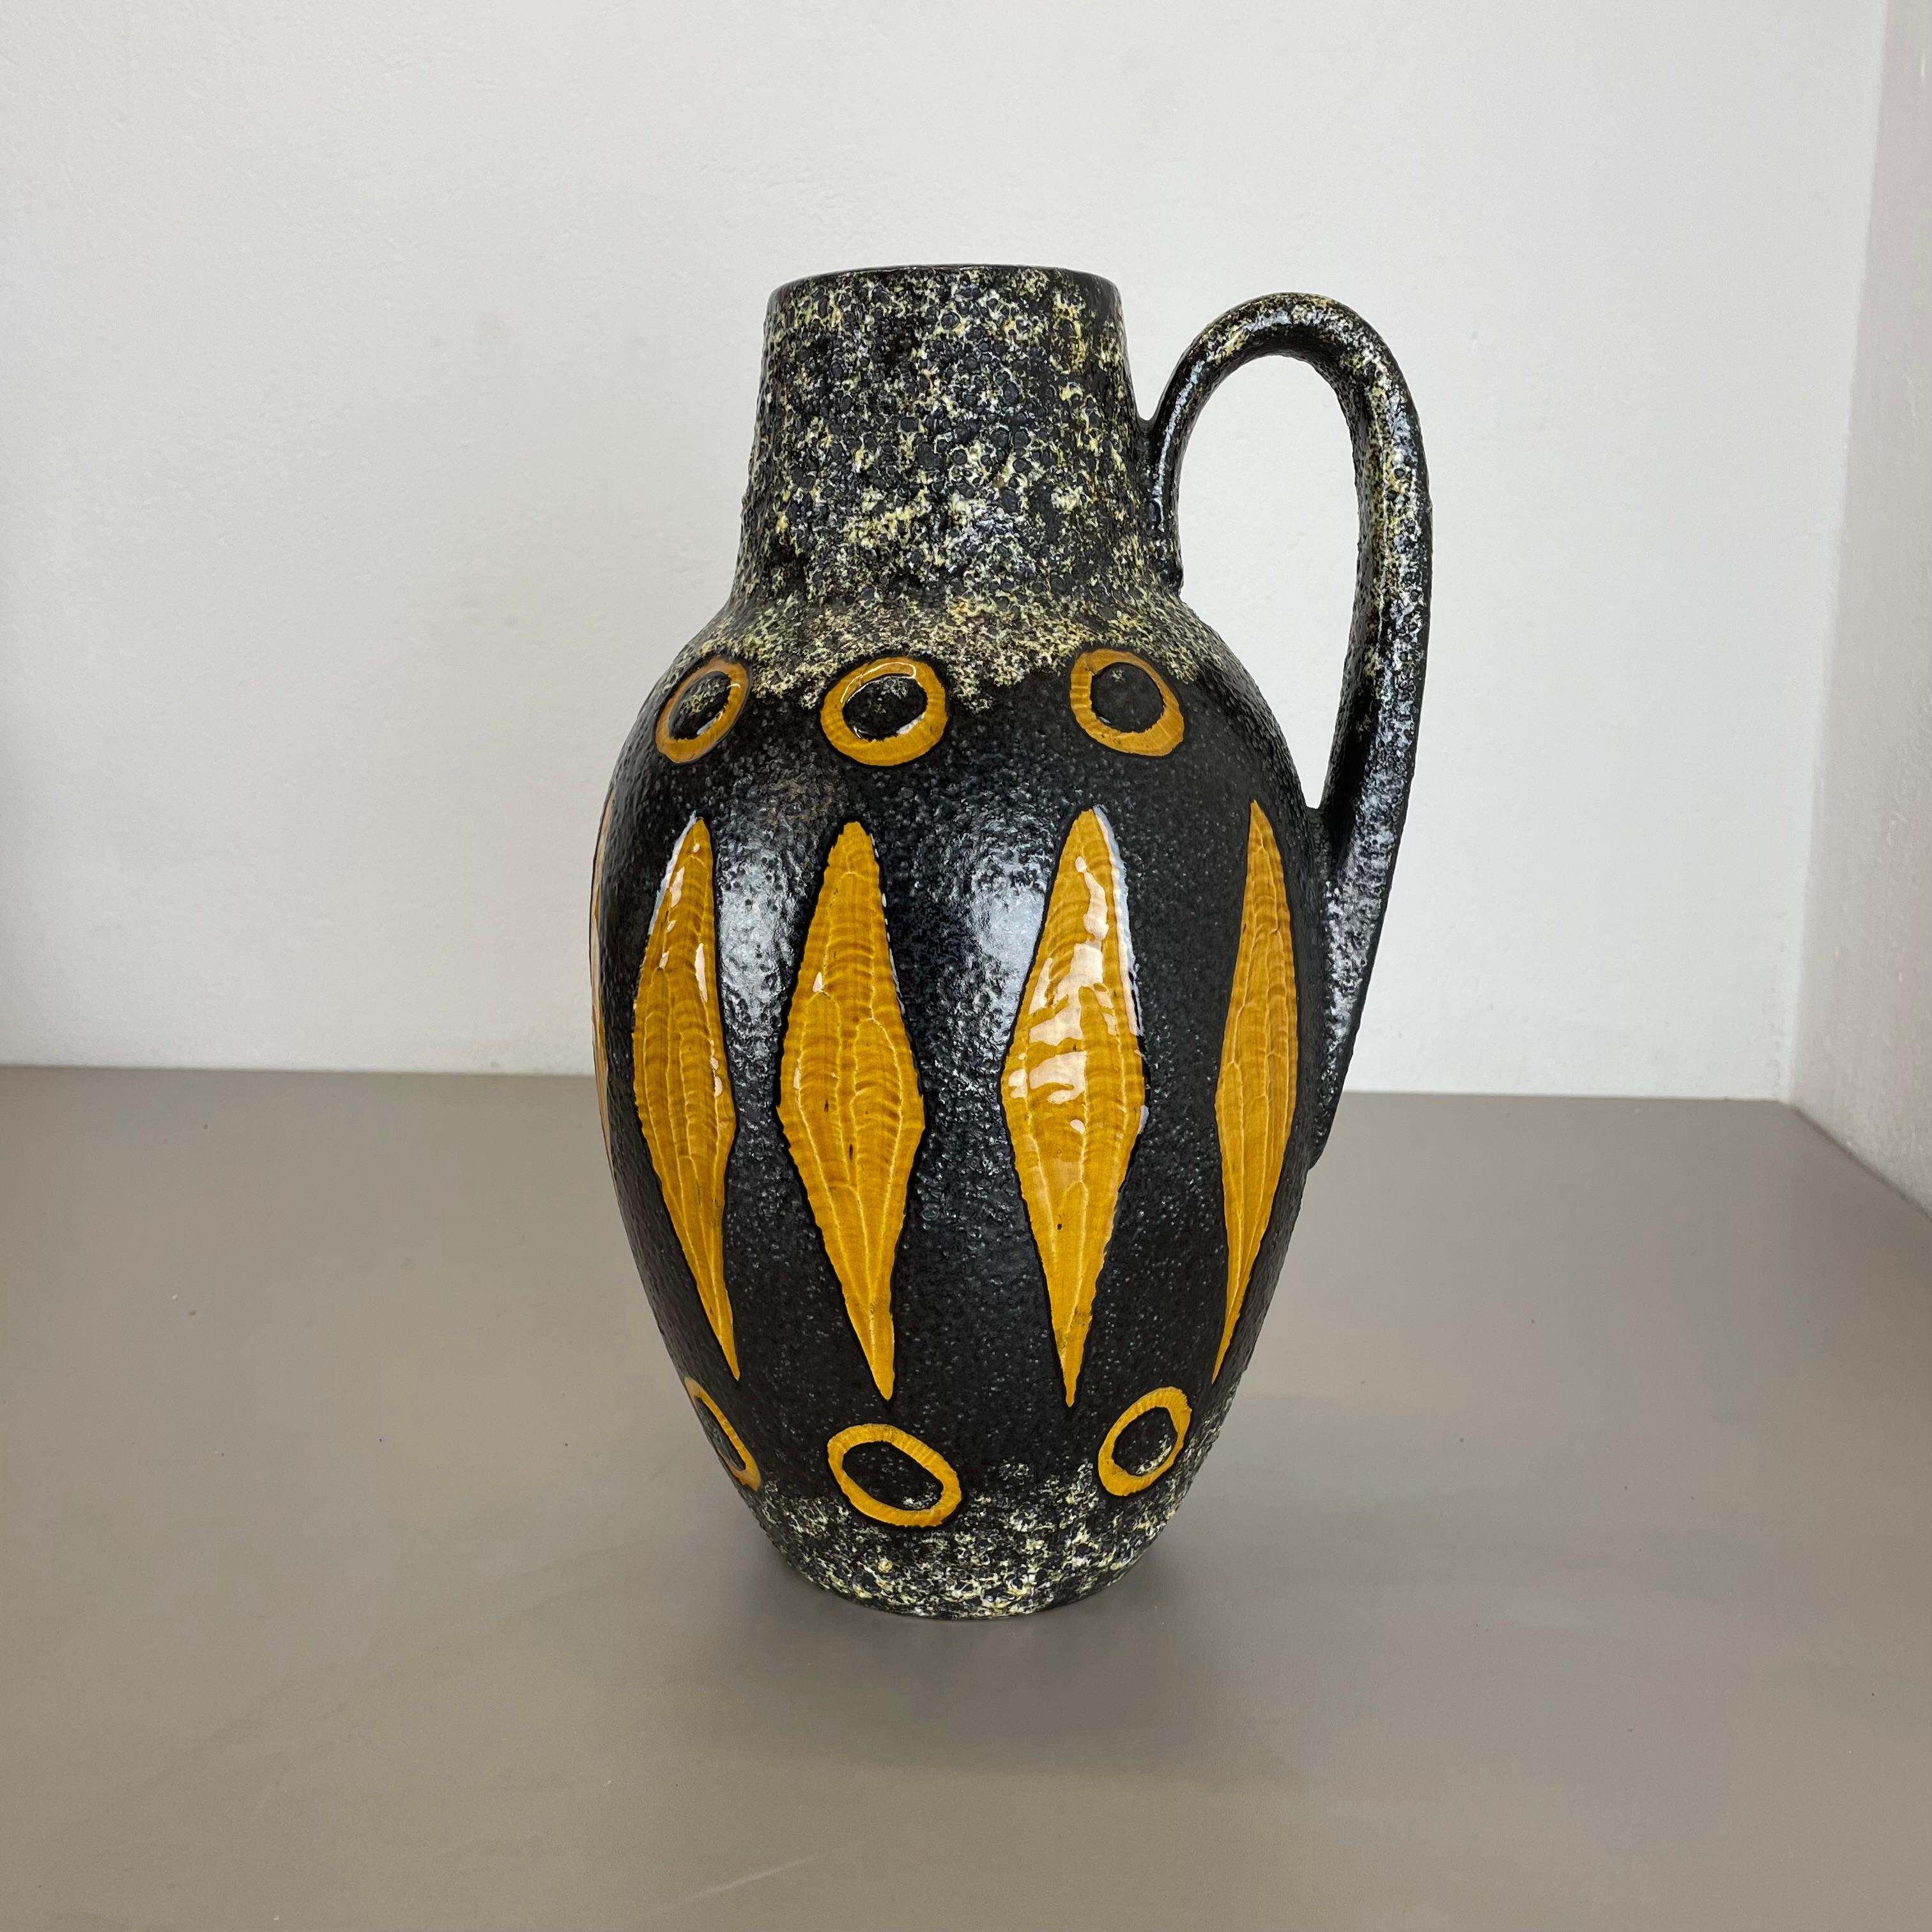 Article:

Fat lava art vase extra large version


Model: 279-38


Producer:

Scheurich, Germany



Decade:

1970s


Description:

This original vintage vase was produced in the 1970s in Germany. It is made of ceramic pottery in fat lava optic with